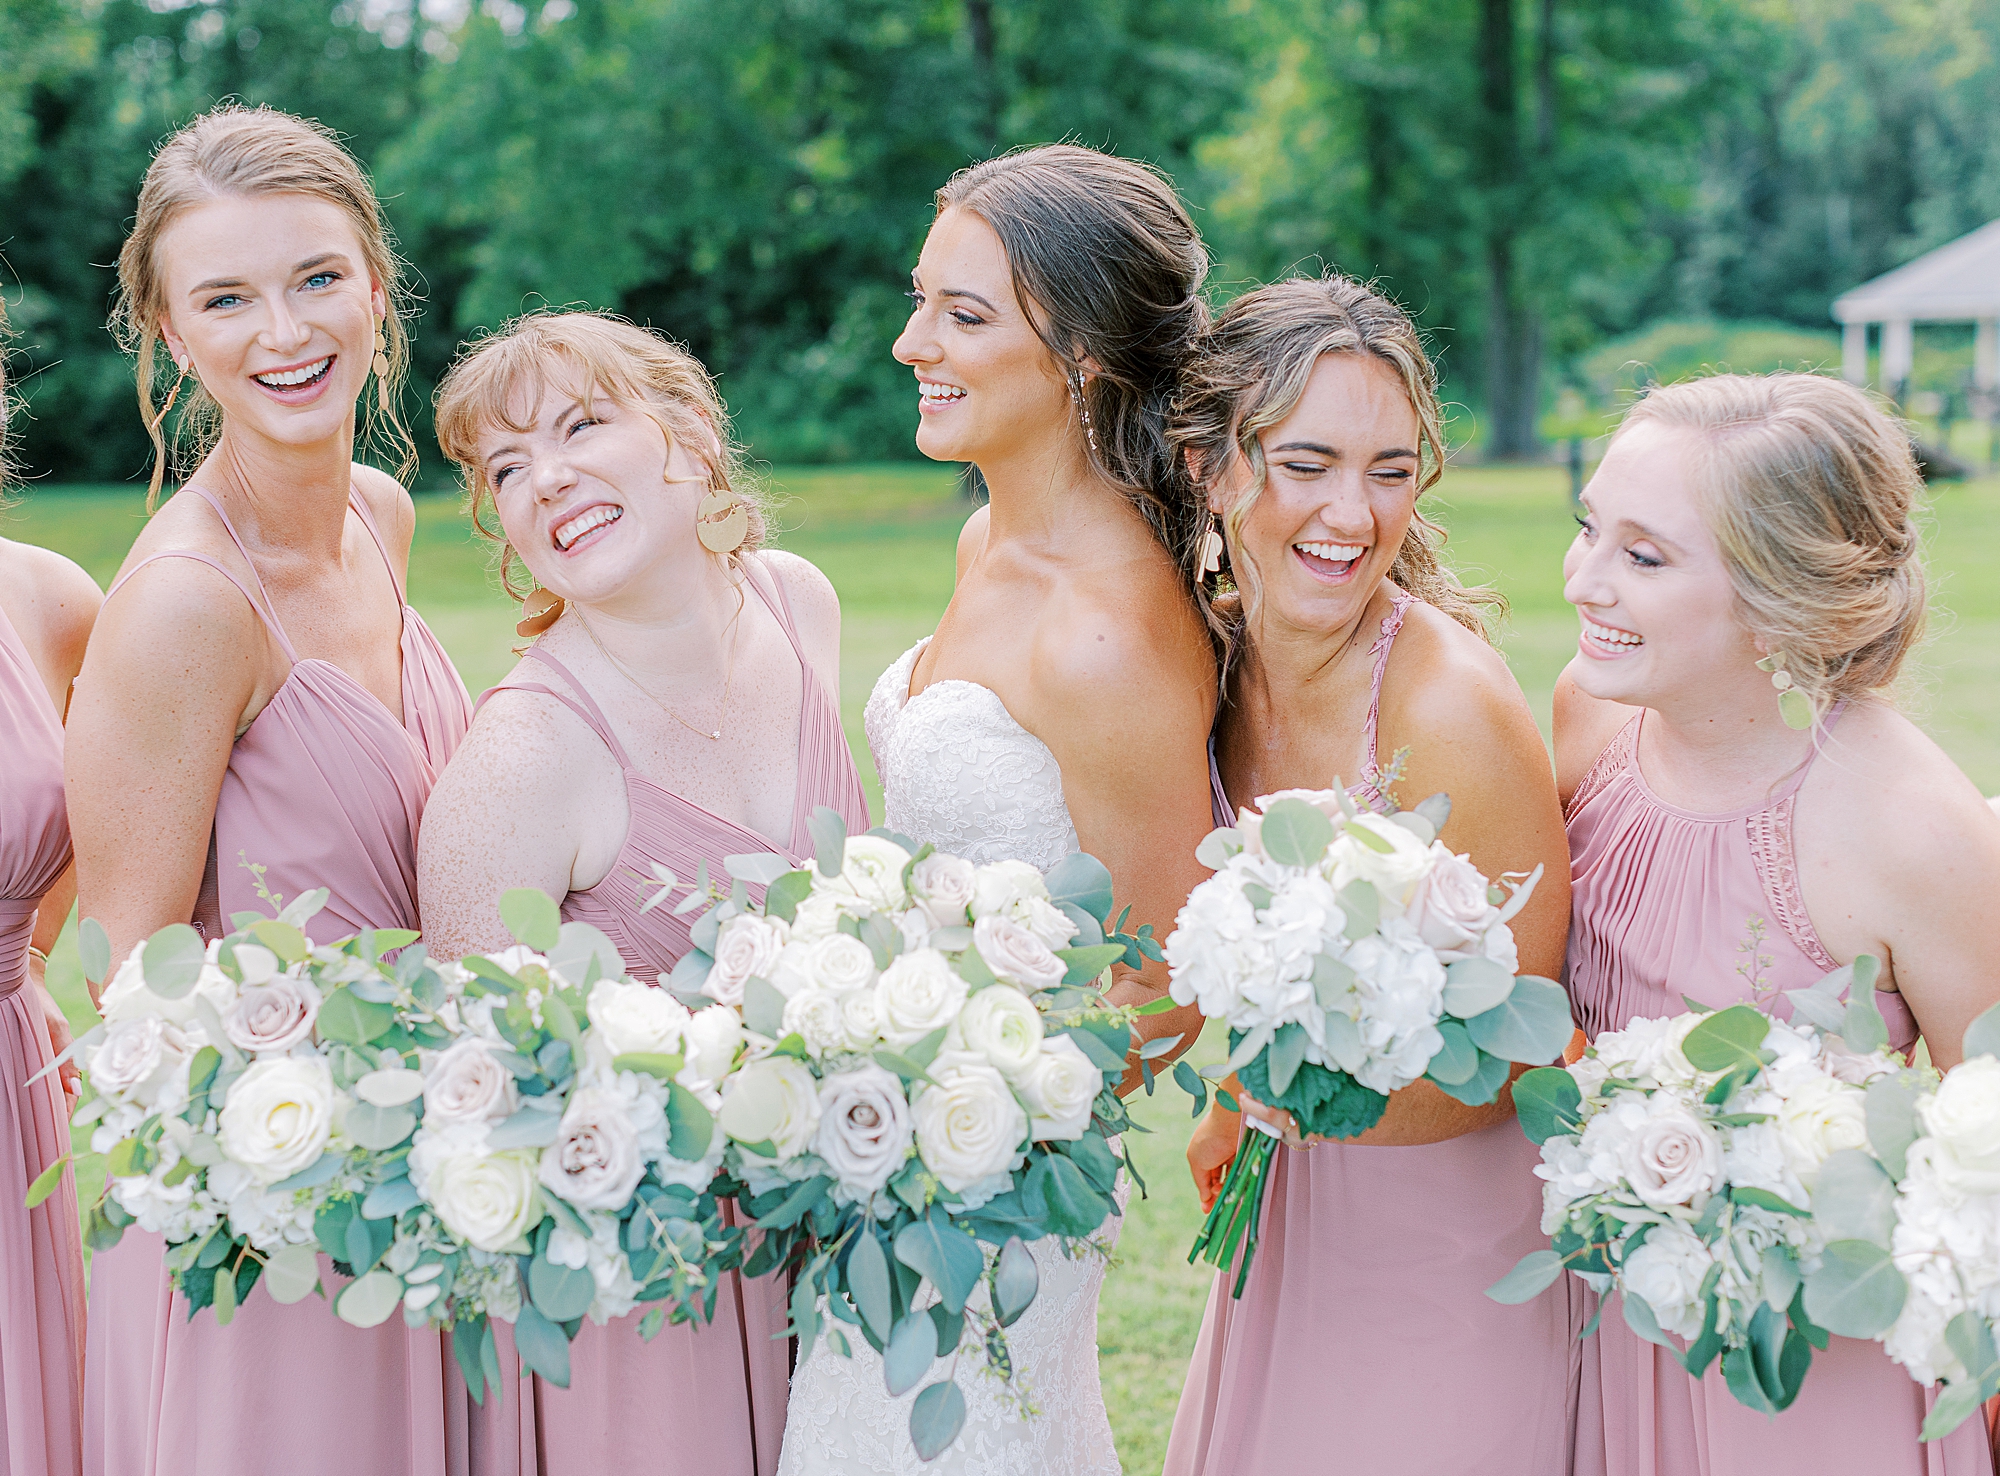 Bridesmaids and bride laughing.